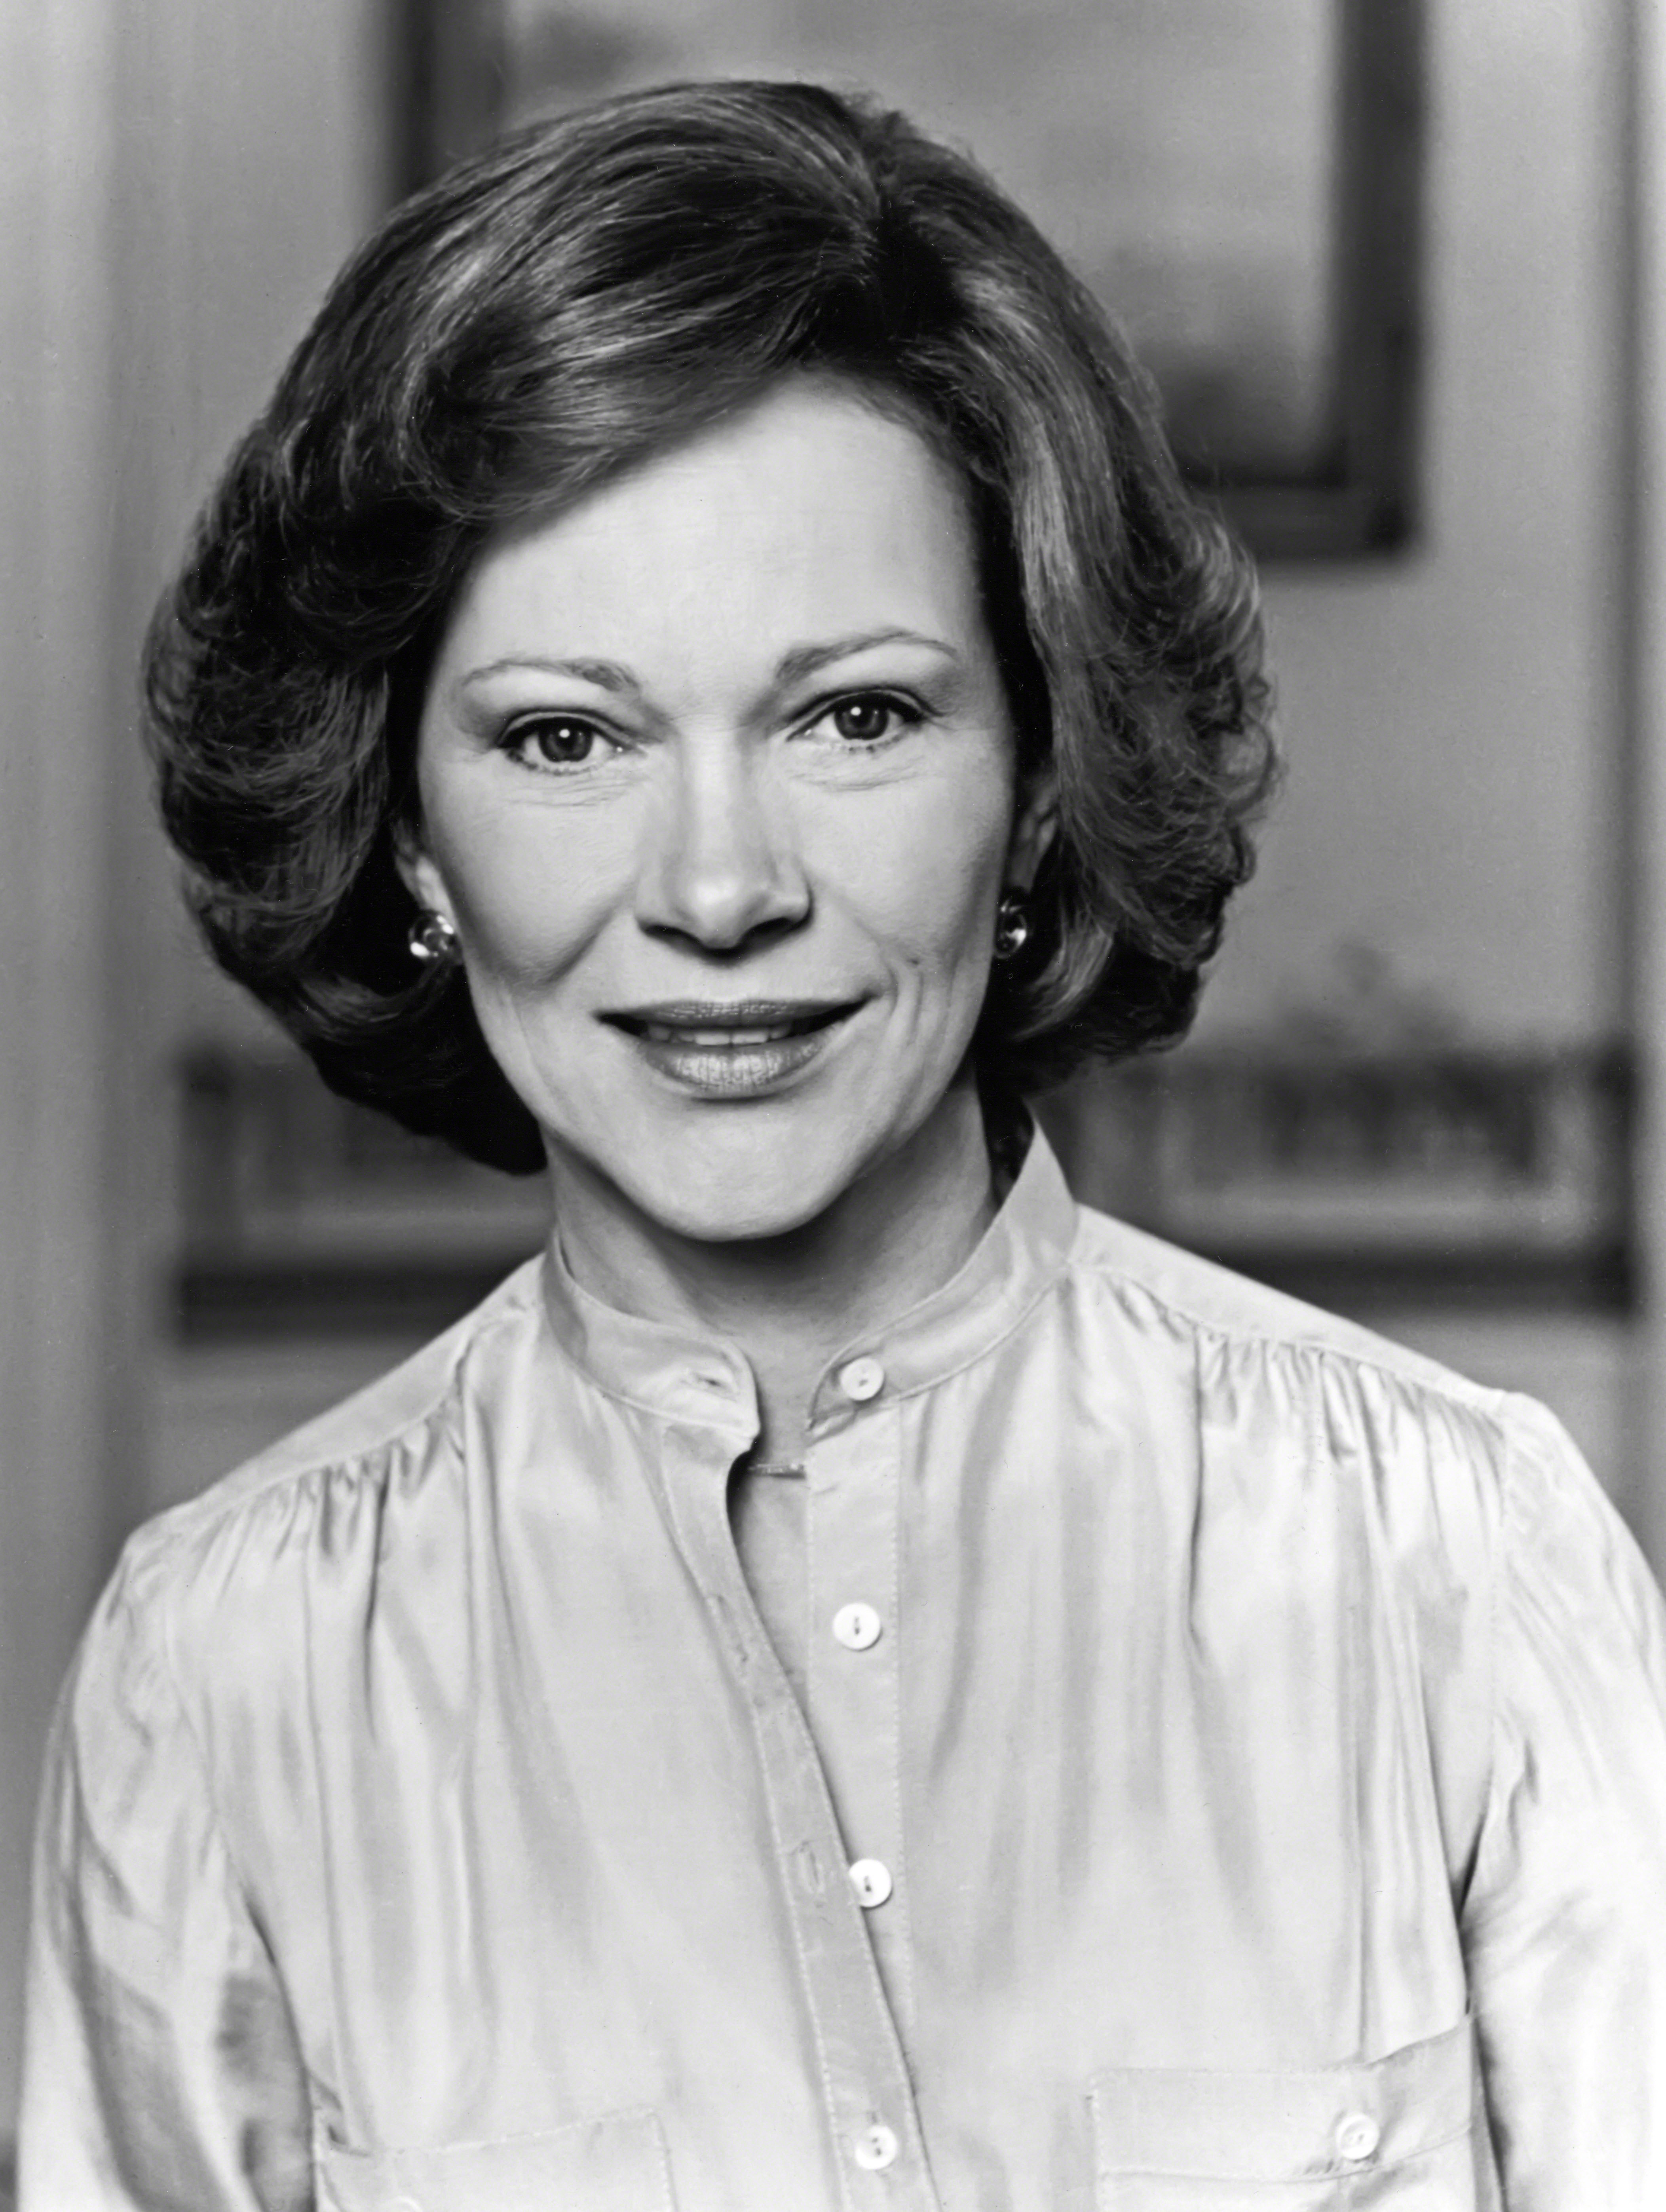 Former U.S. First Lady Rosalynn Carter photographed circa 1970s. | Source: Getty Images